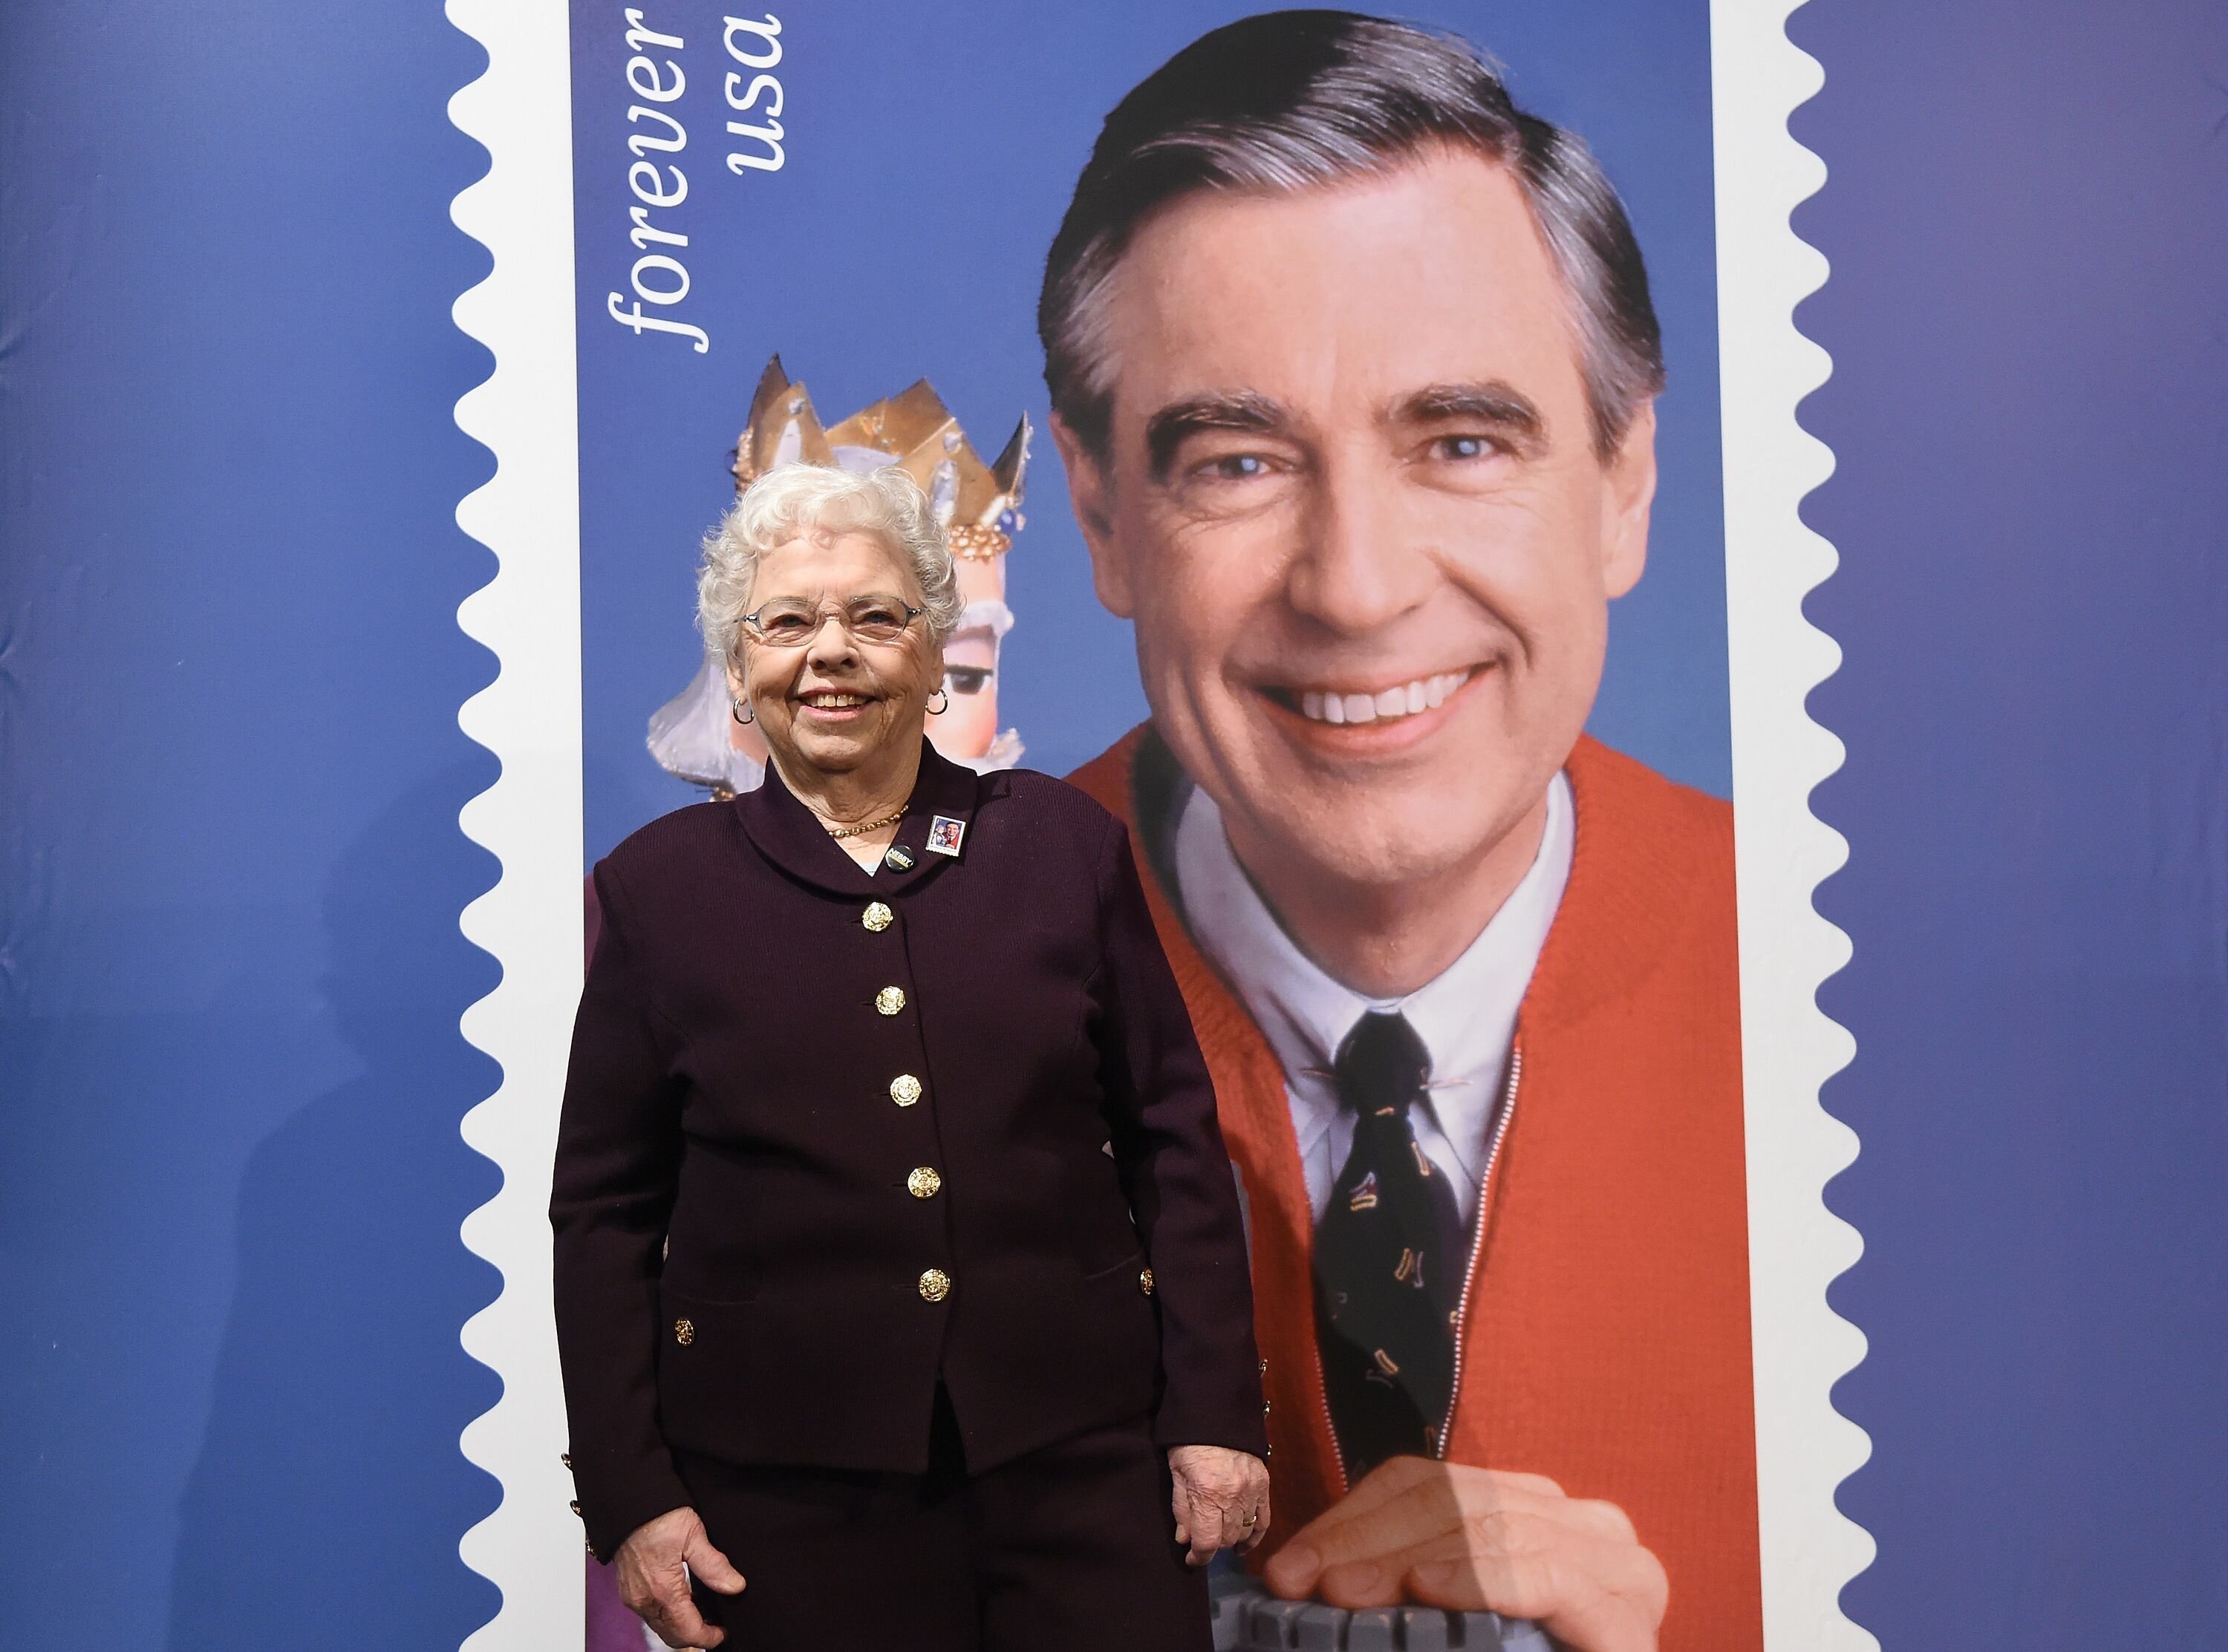 Joanne Rogers at the US Postal Service Dedication of the Mister Rogers Forever Stamp on March 23, 2018, in Pittsburgh, Pennsylvania. | Source: Jason Merritt/Getty Images